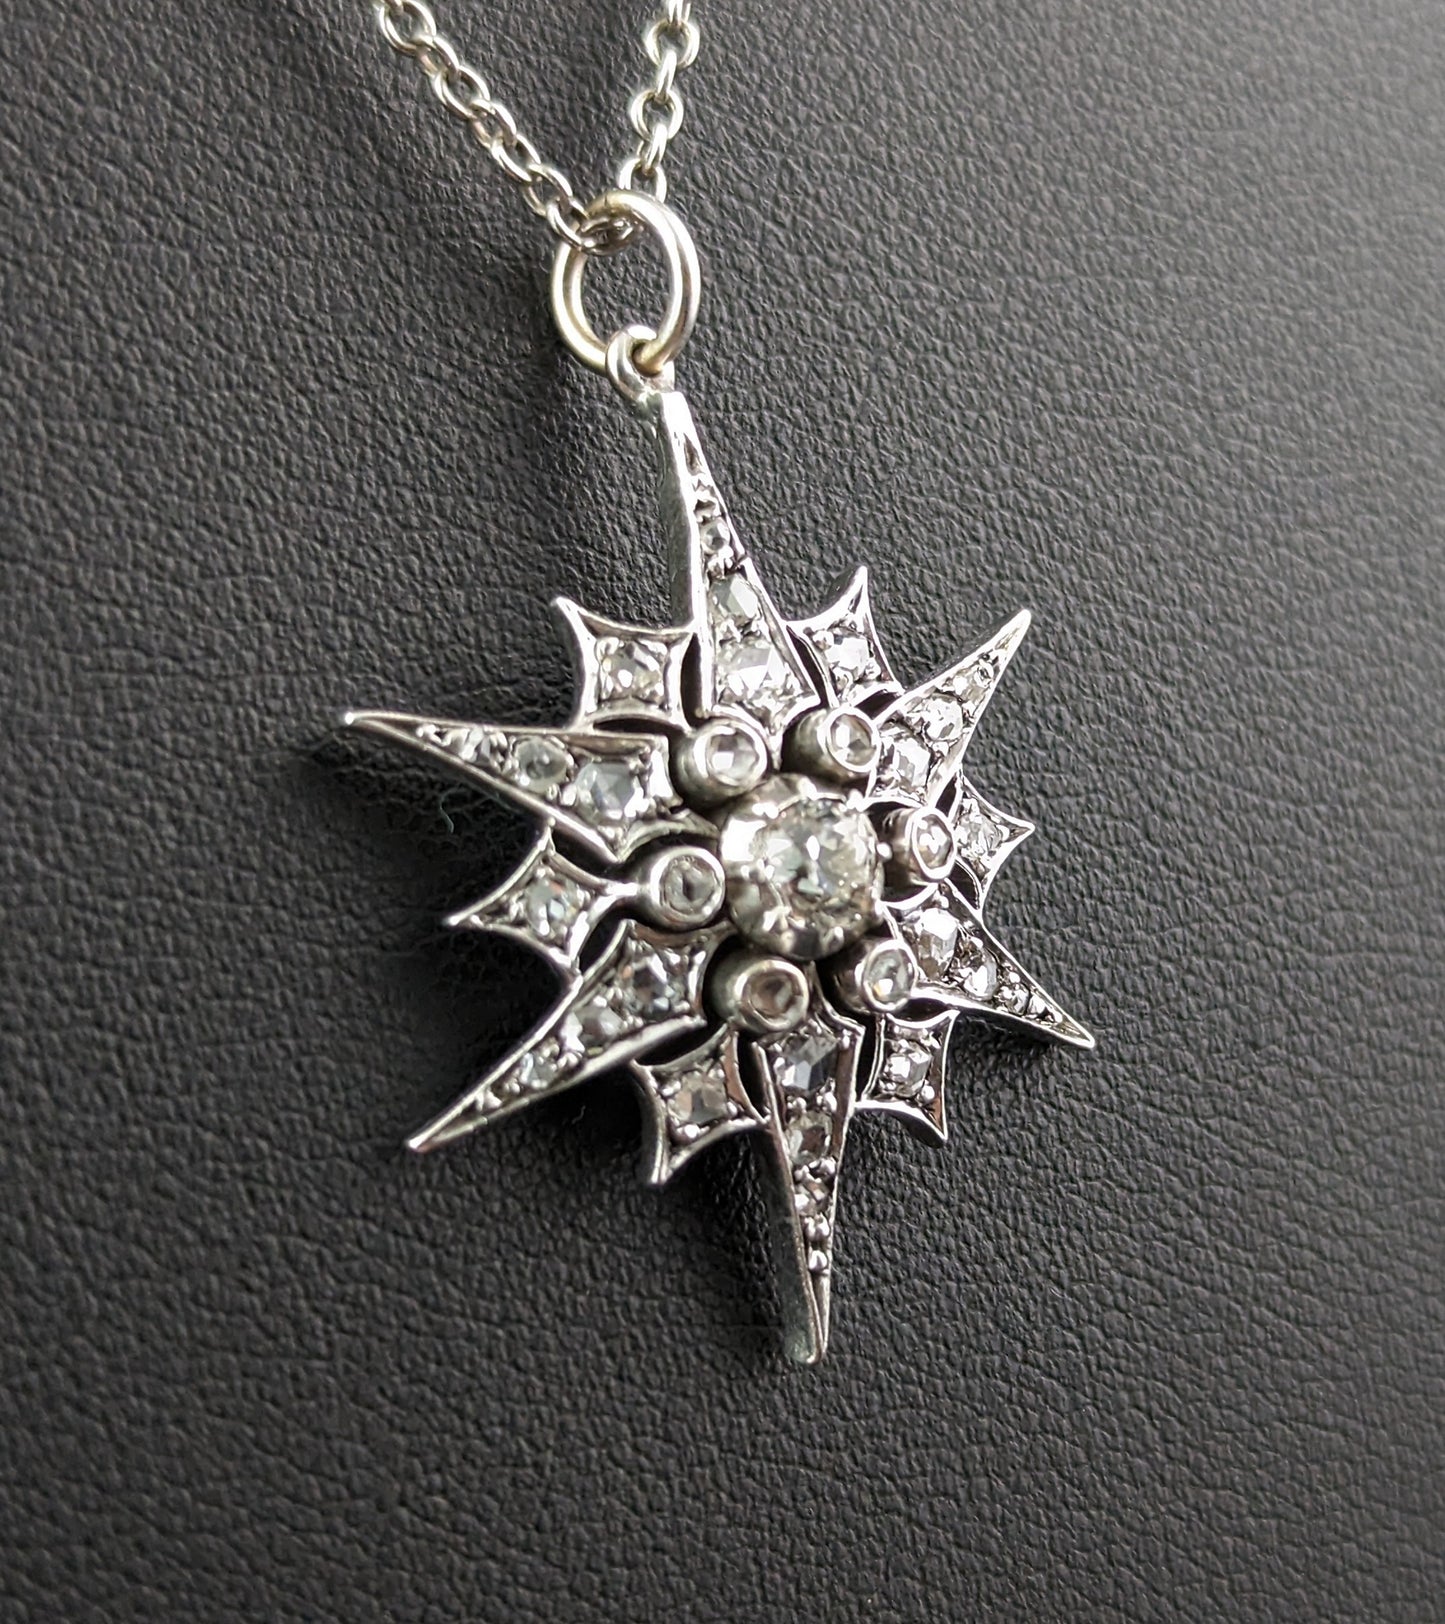 Antique Victorian Diamond Star pendant, Silver on gold, necklace